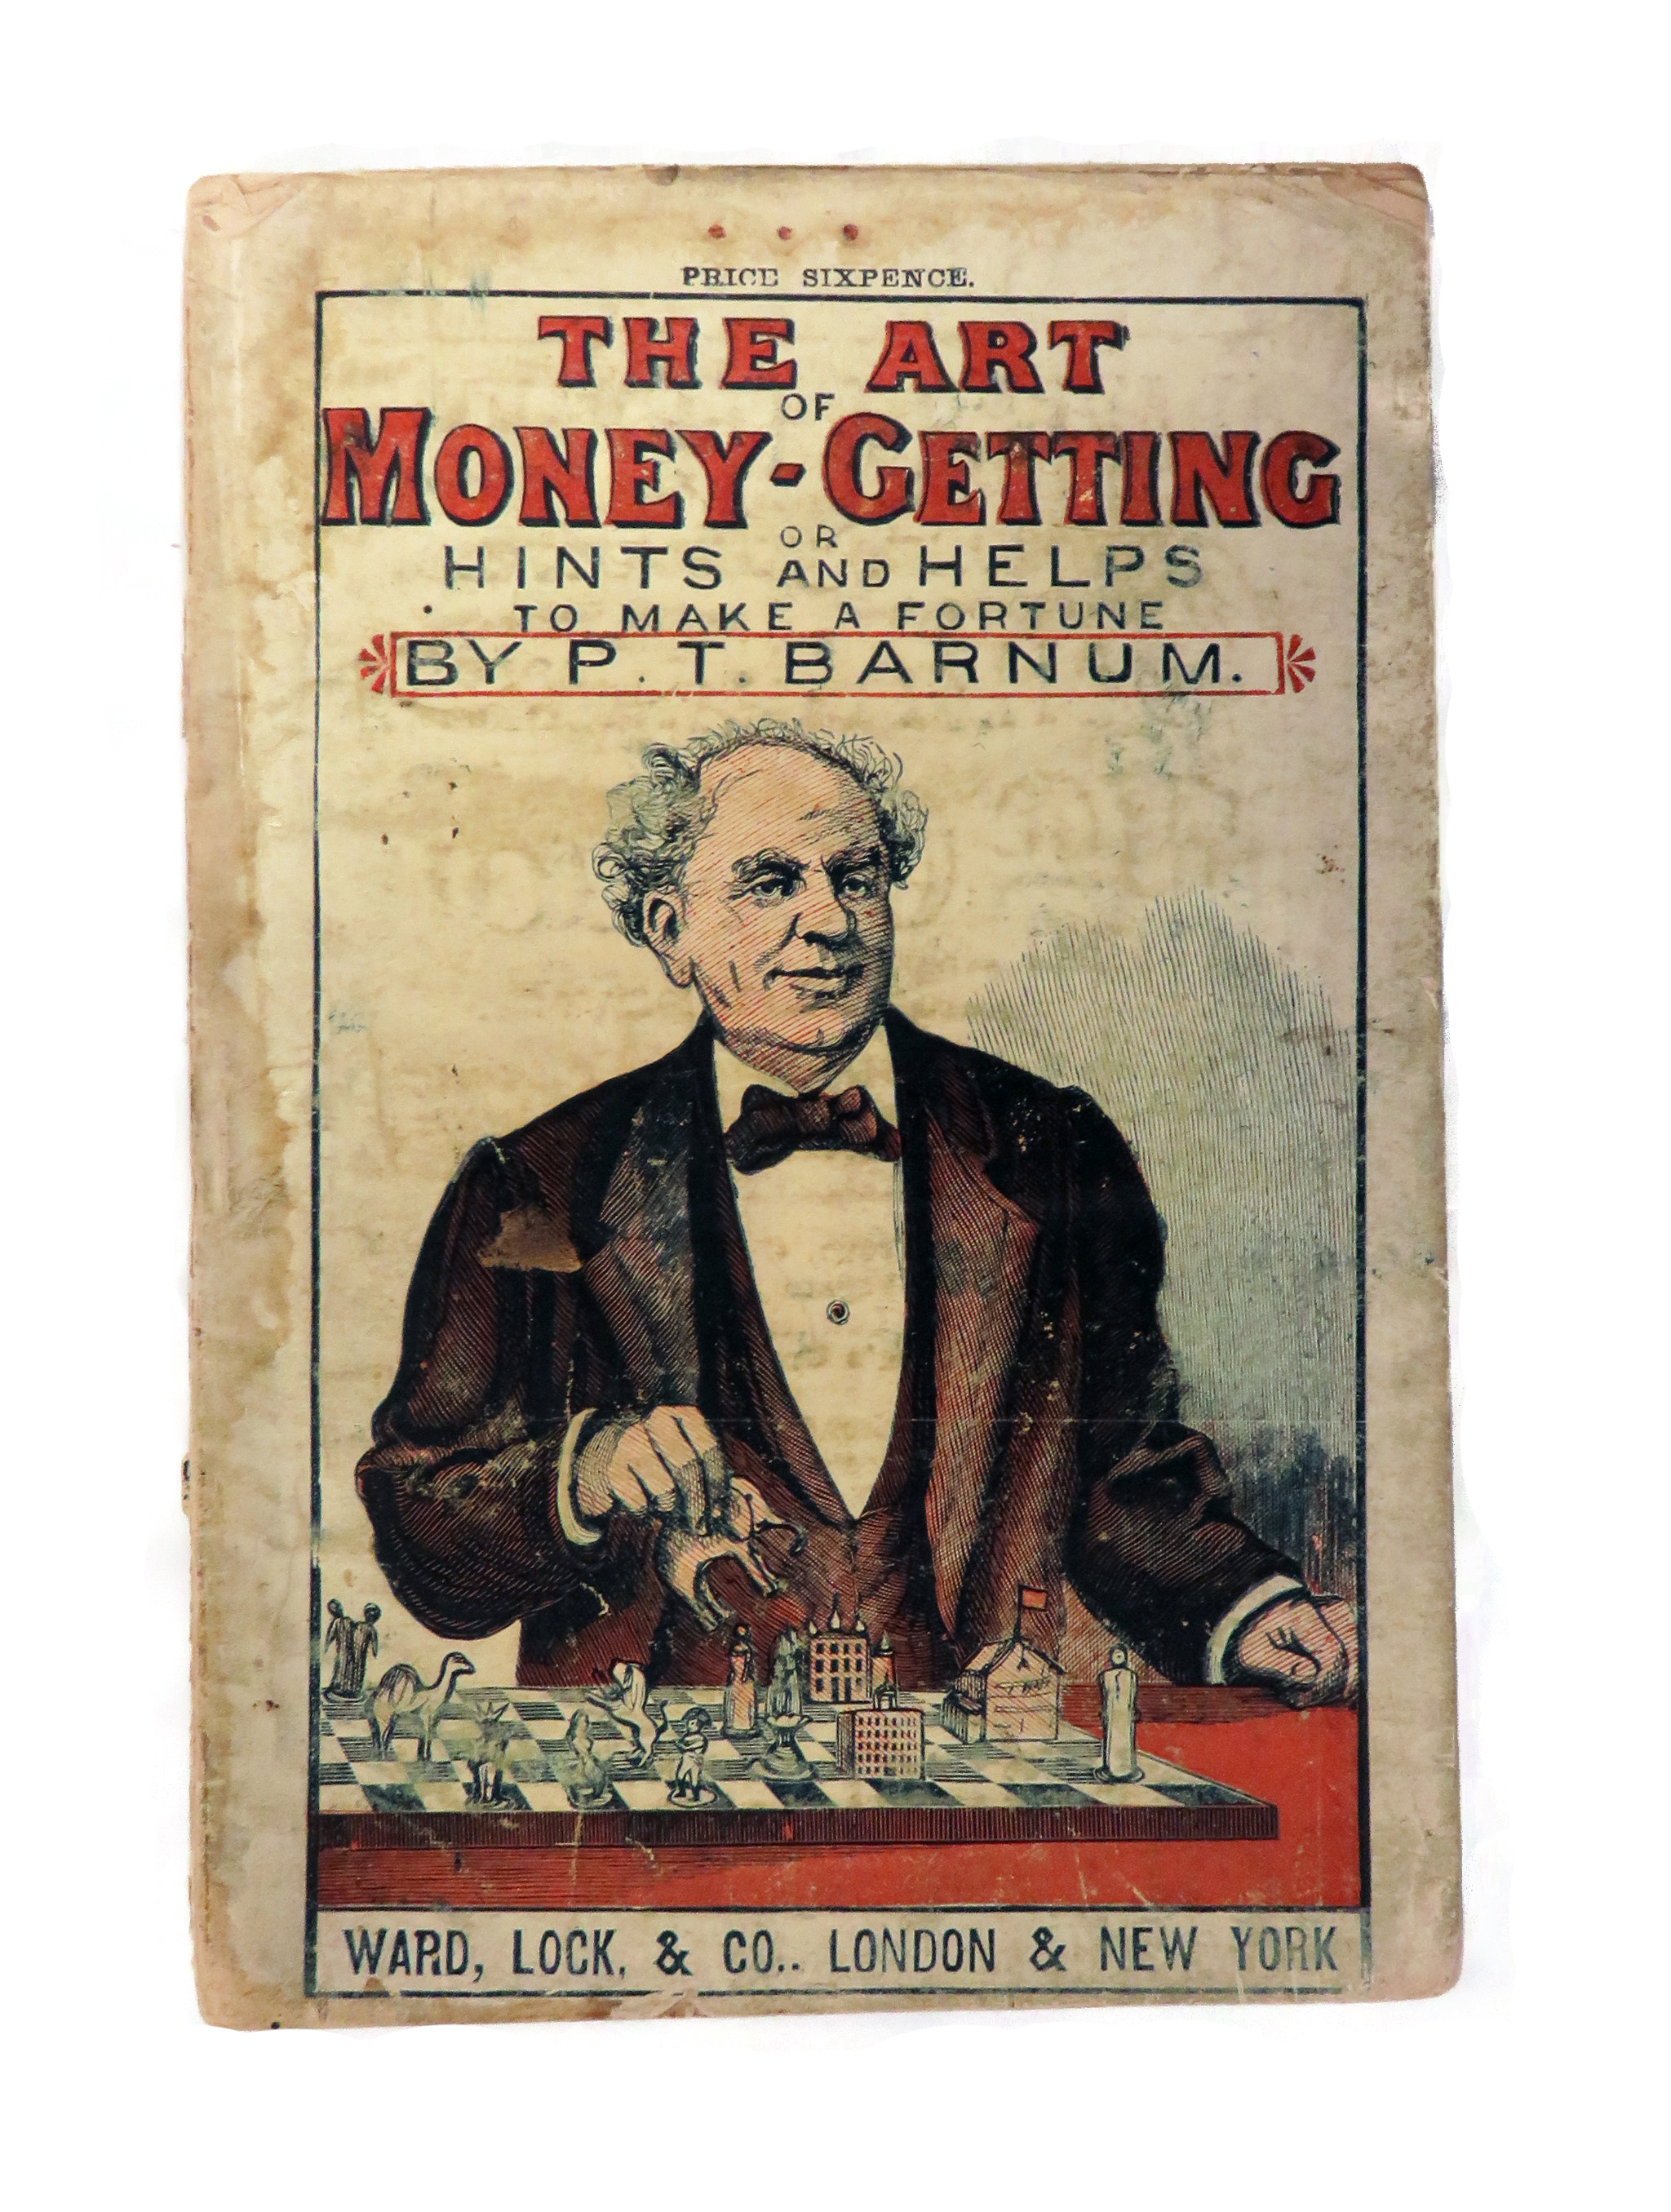 The Art of Money-Getting or, Hints and Helps How to Make a Fortune.